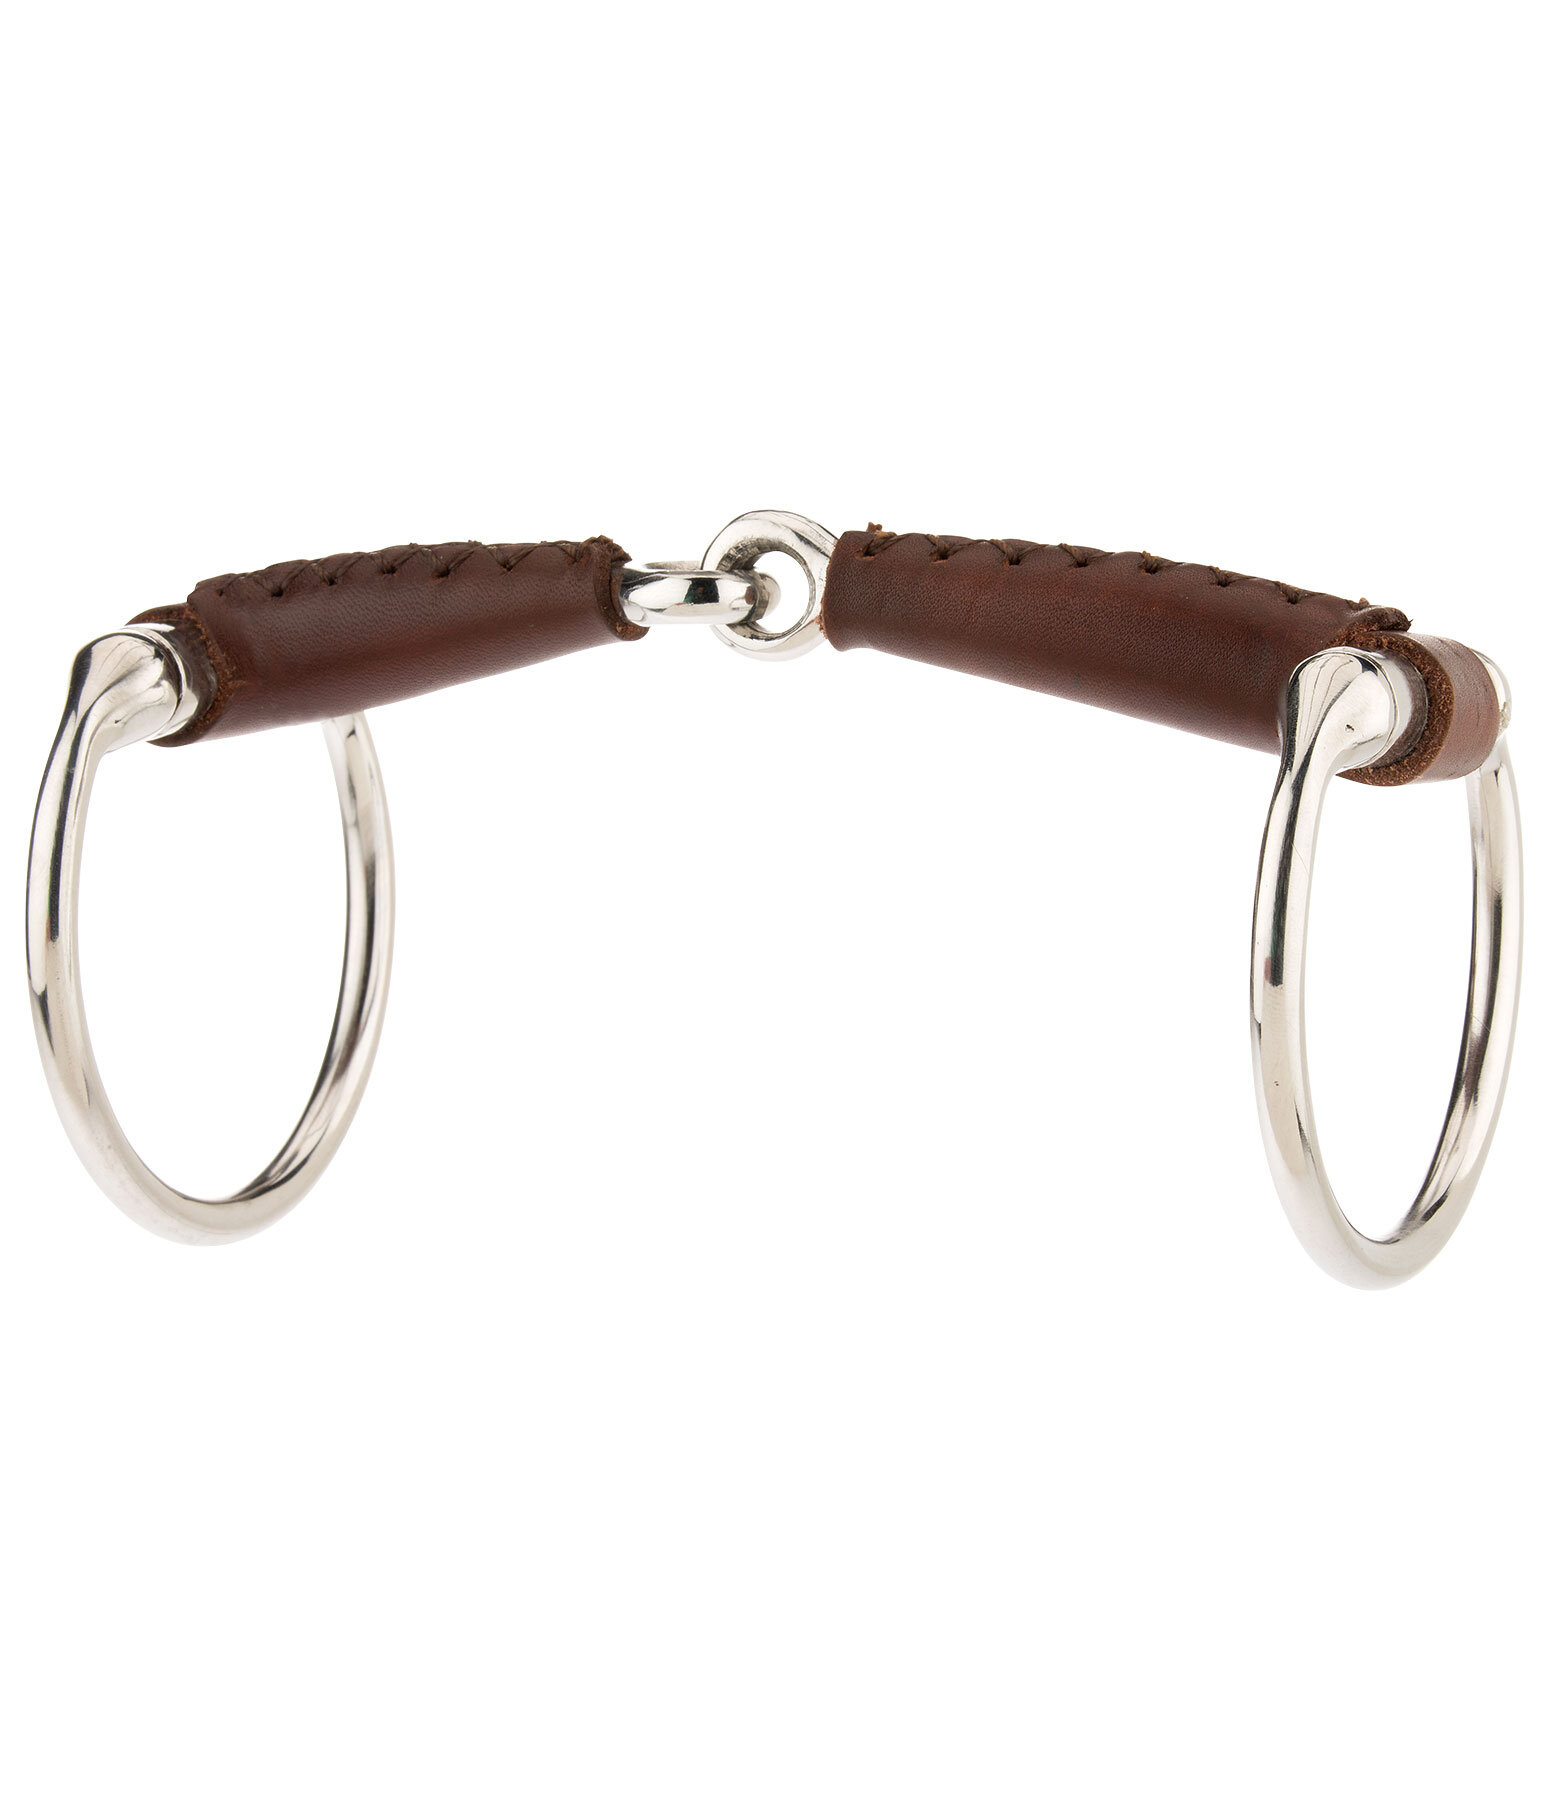 Leather Eggbutt Snaffle Bit, Single Jointed